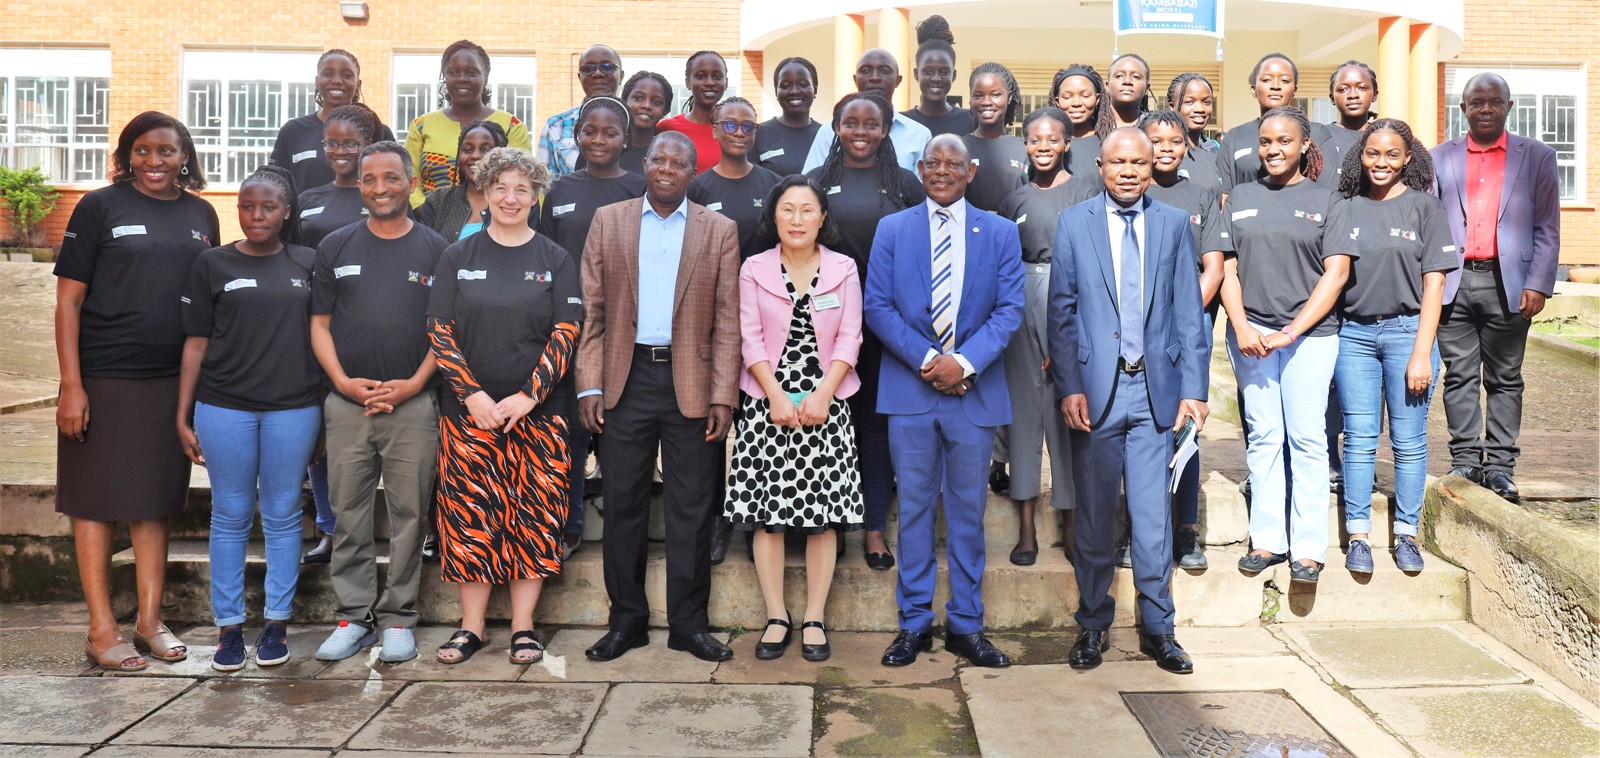 Front Row: The Vice Chancellor-Prof. Barnabas Nawangwe (2nd R) and Principal CoBAMS-Prof. Eria Hisali (R) with the PI-Prof. Boksun Kim (3rd R), Co-PI-Dr. Cathy Ikiror Mbidde (L), Co-PI-Dr. Geremew Teklu (3rd L), Ms. Pippa Waller (4th L), officials and mentees at the launch of a mentorship program for female students in Science, Technology, Engineering and Mathematics (STEM) on 6th April 2023 at CoBAMS, Makerere University.